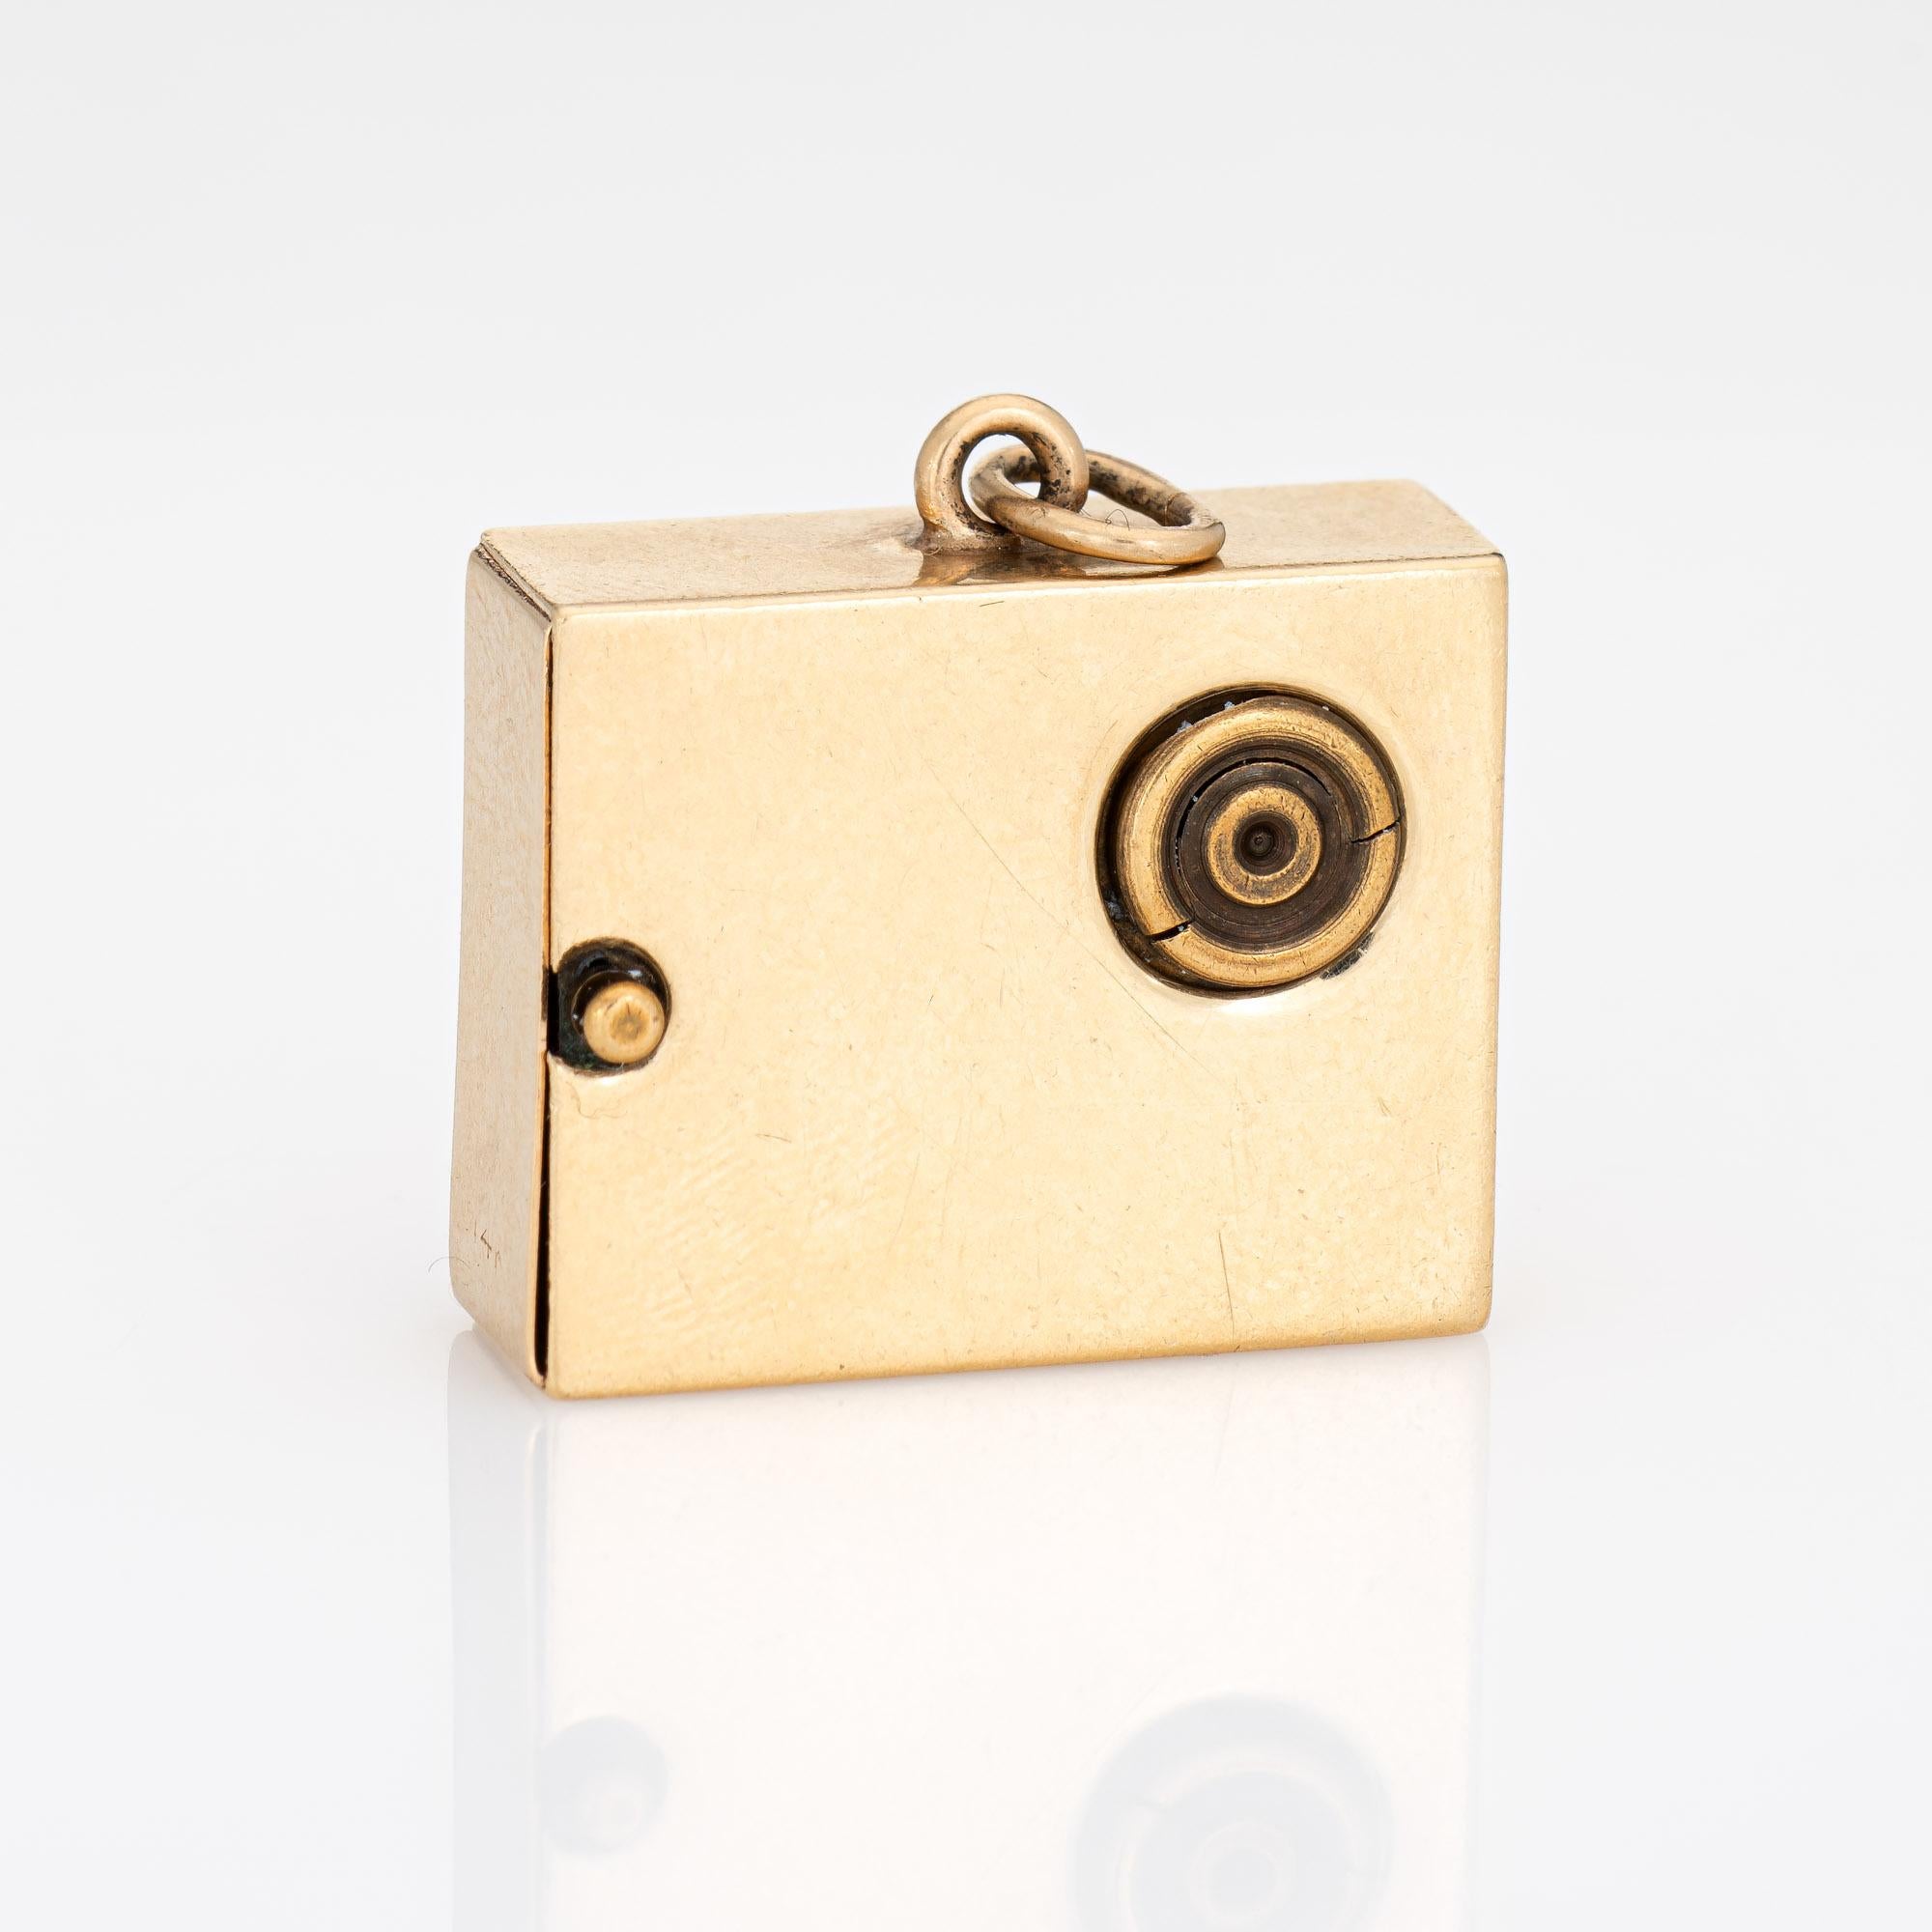 Finely detailed vintage mechanical music box charm crafted in 14k yellow gold (circa 1950s to 1960s).  

The distinct gemstone set music box charm features a florentine finish with a music sheet and applied Treble Clef. The back of the charm is